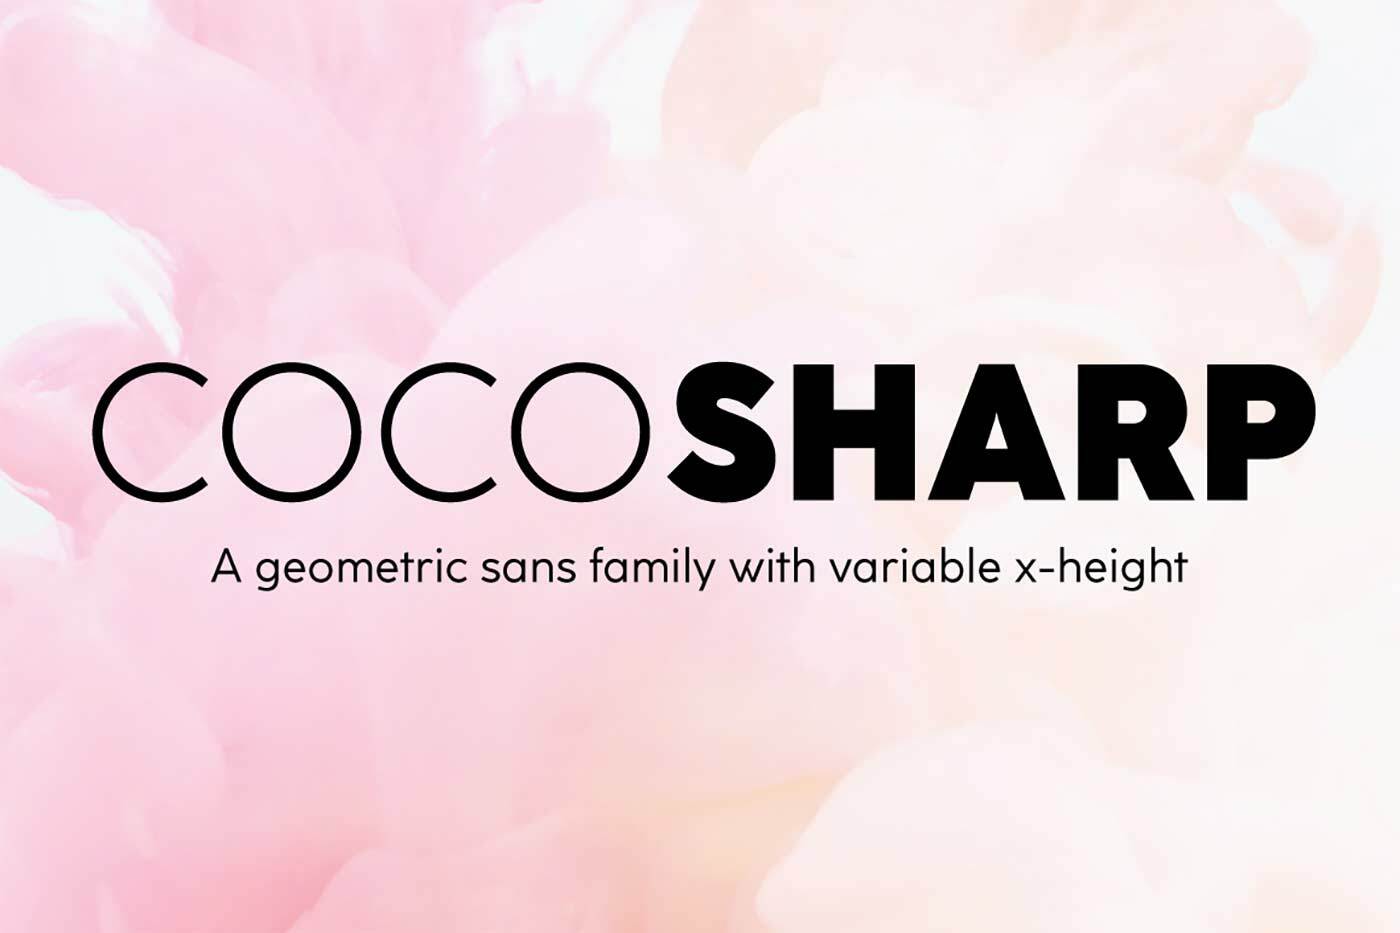 A geometric sans family with variable x-height